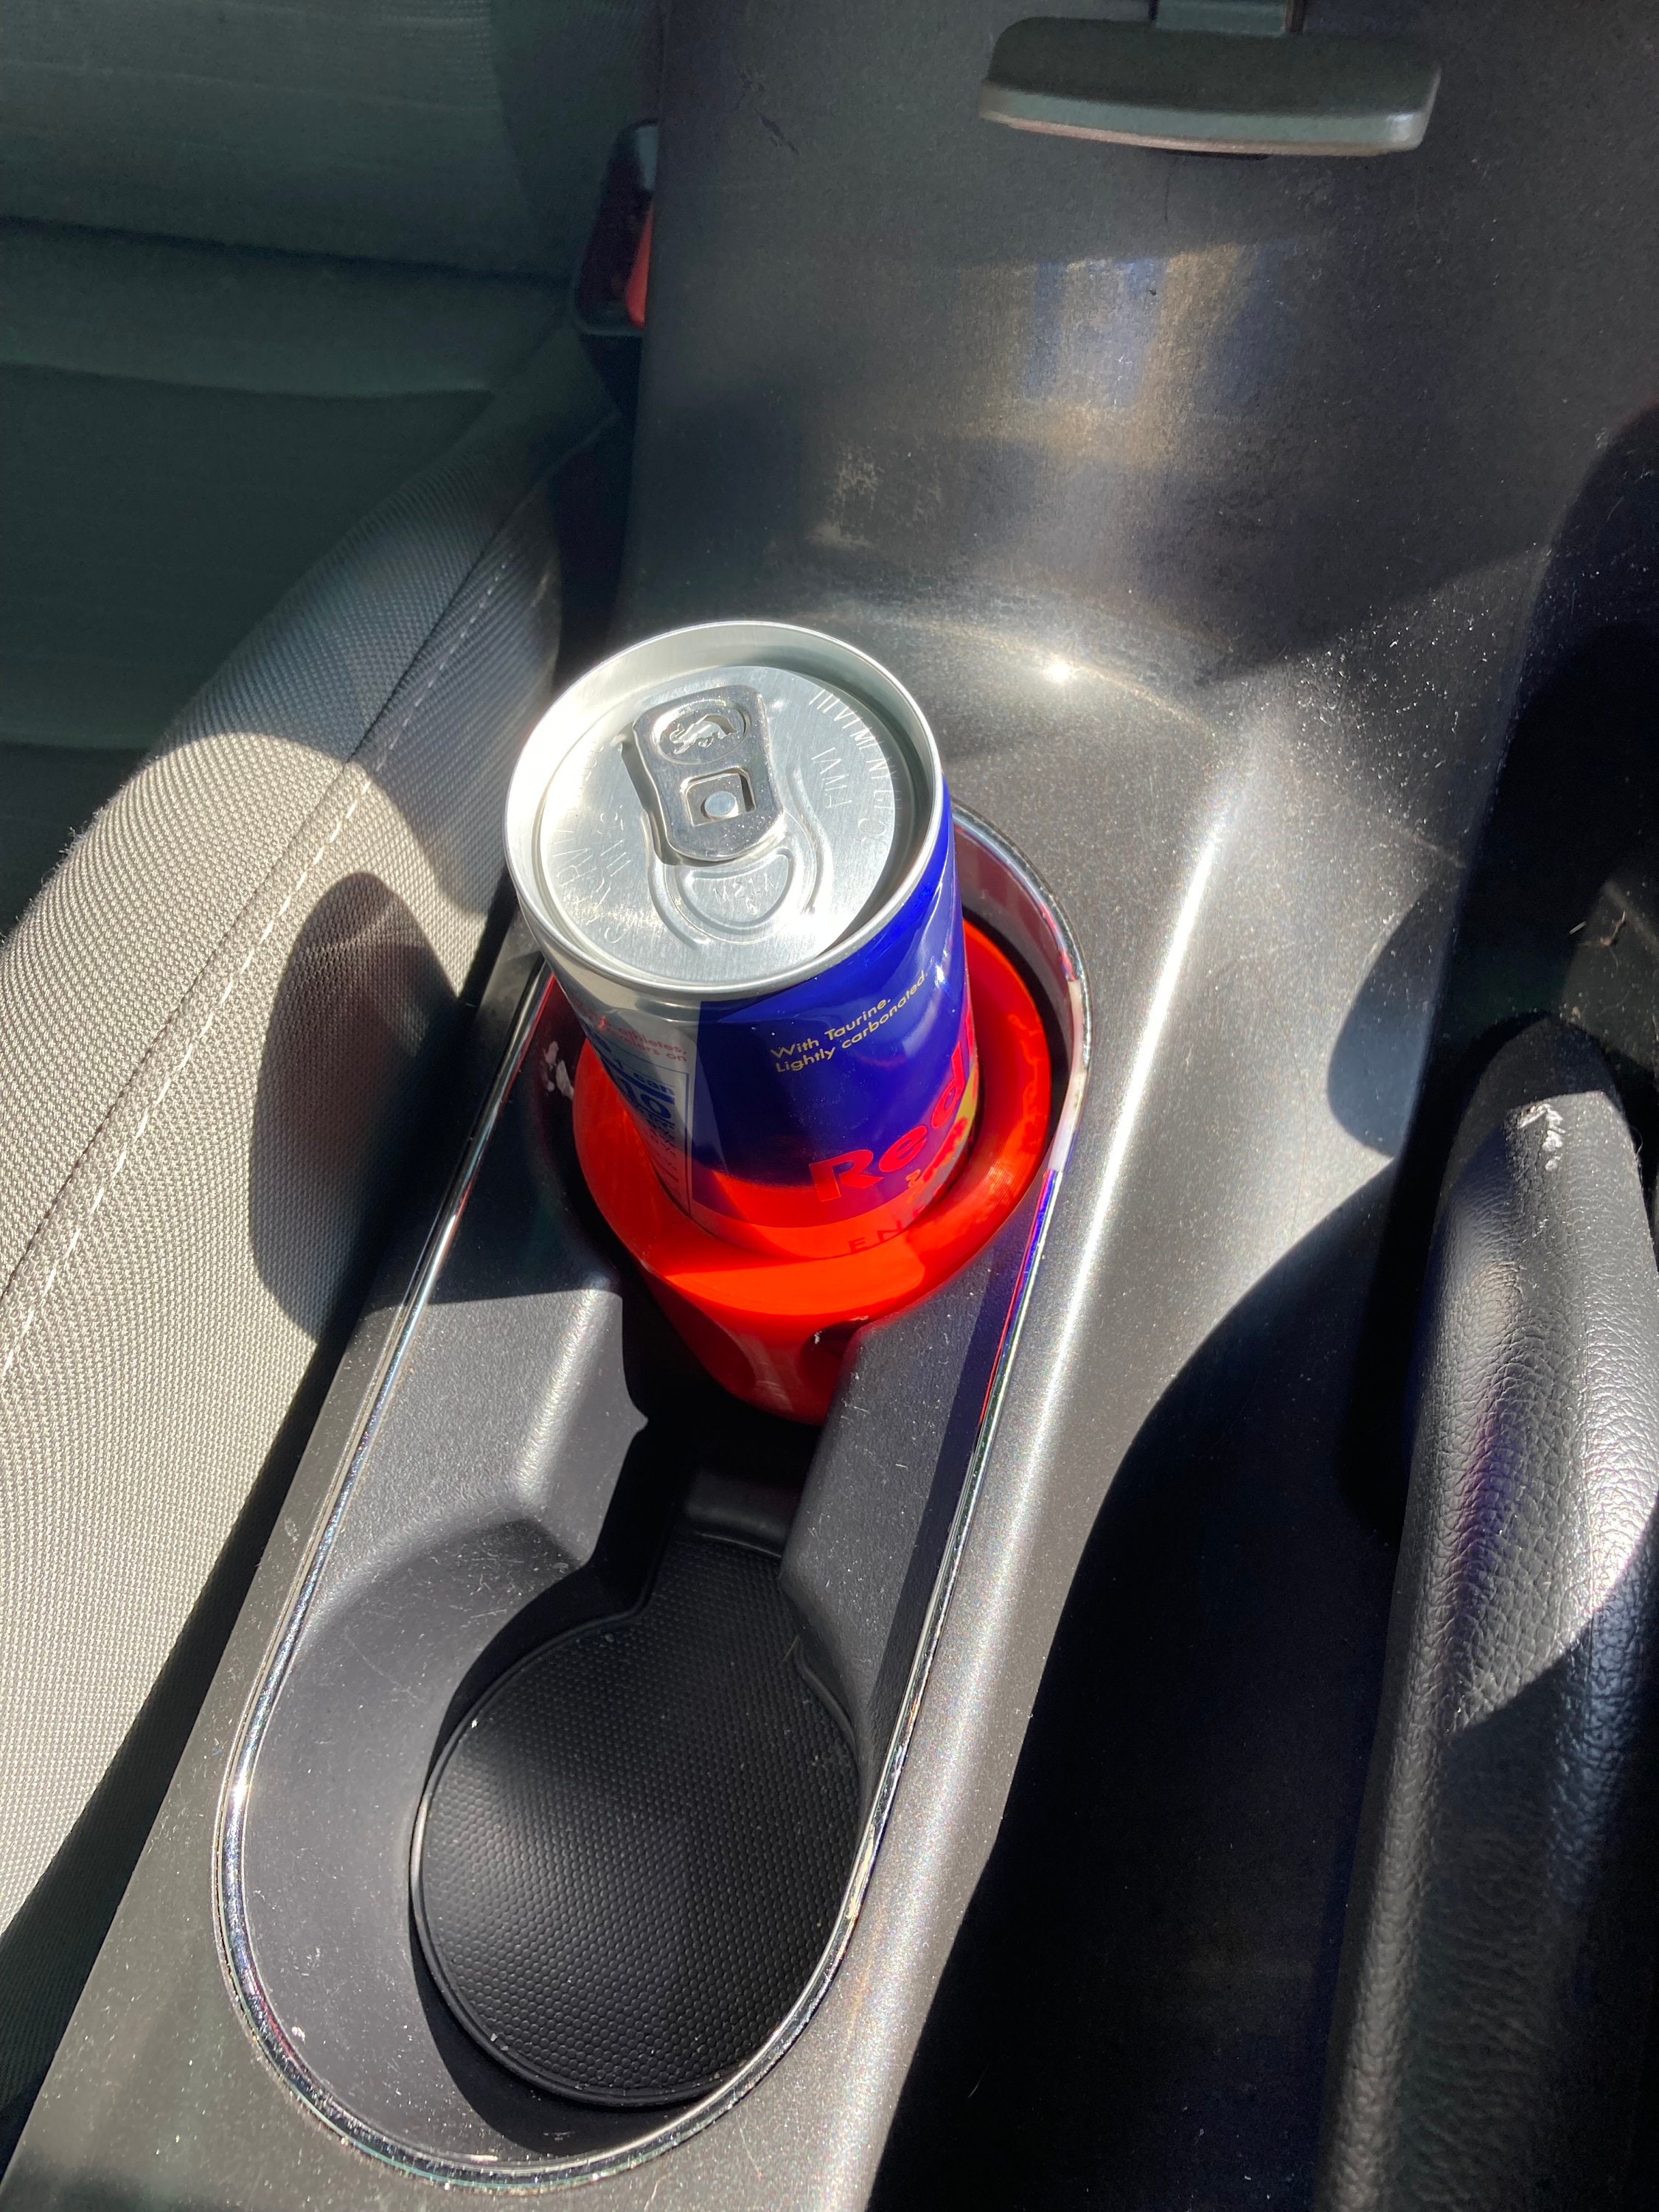 Red Bull Car Cup Holder Adapter Fits 8.4 Oz Red Bull Energy Drink Cans  Energy Drink Holder Fits Most 8.4 Oz Cans Fits Most Vehicles 